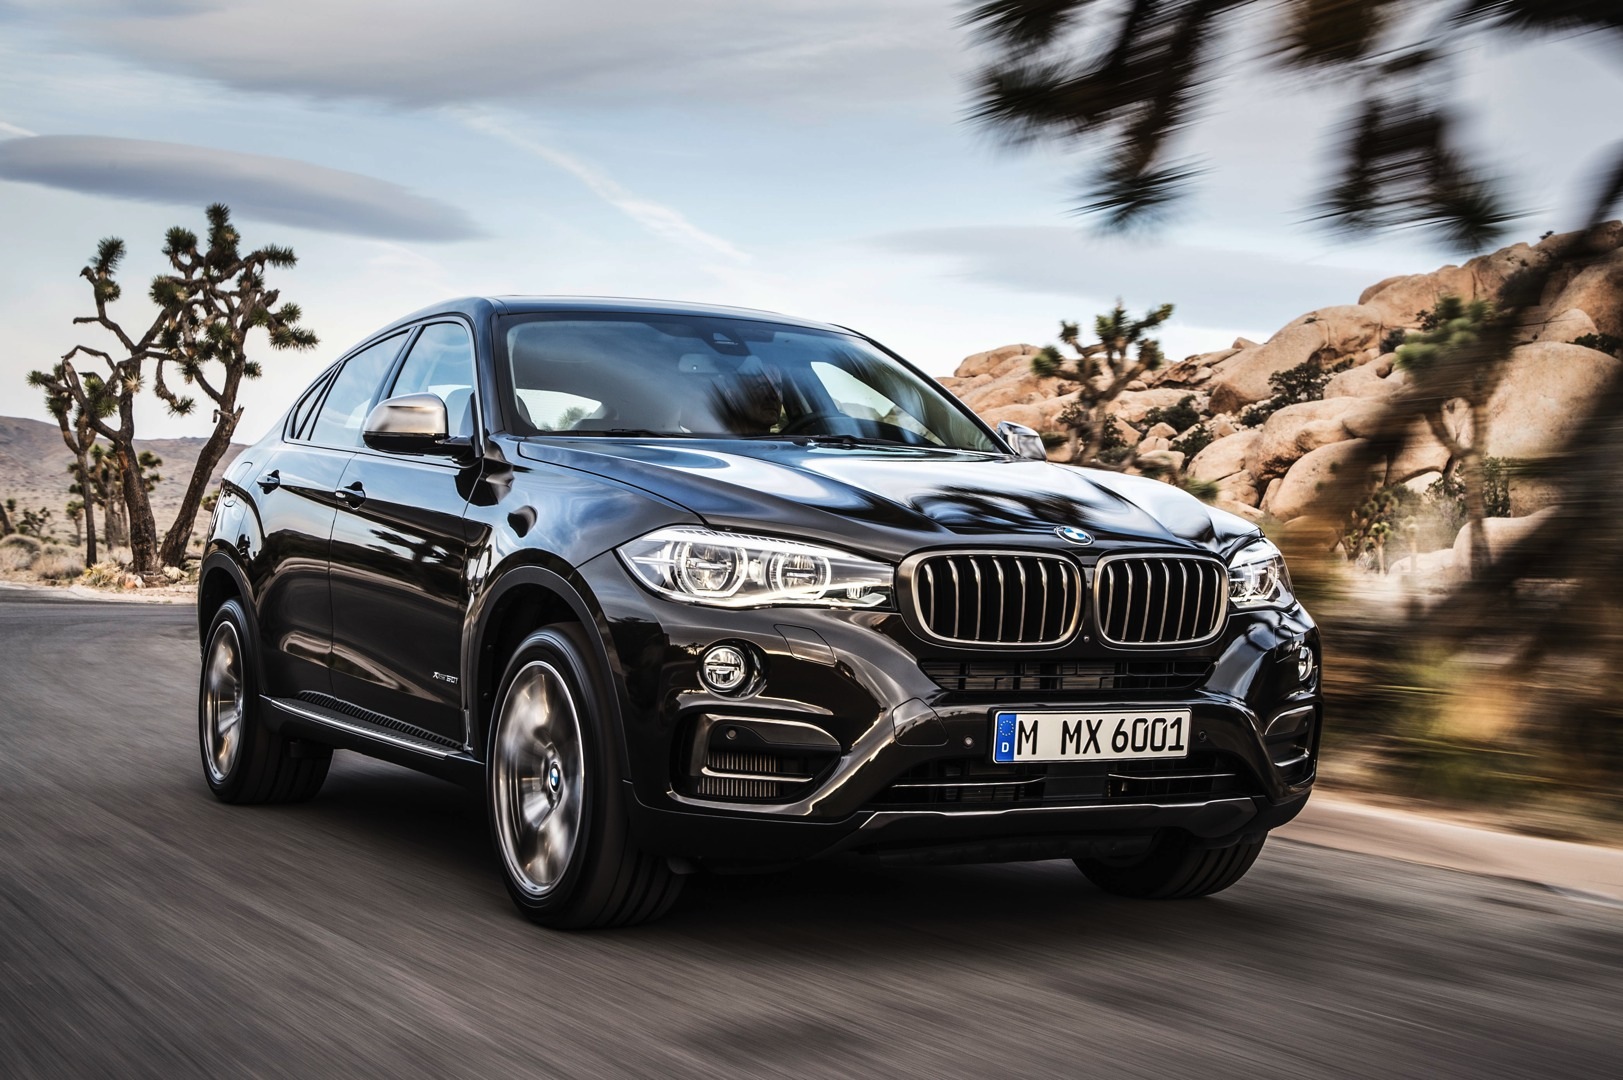  car reviews 2015 bmw f16 x6 leaked ahead of schedule bmw f16 x6